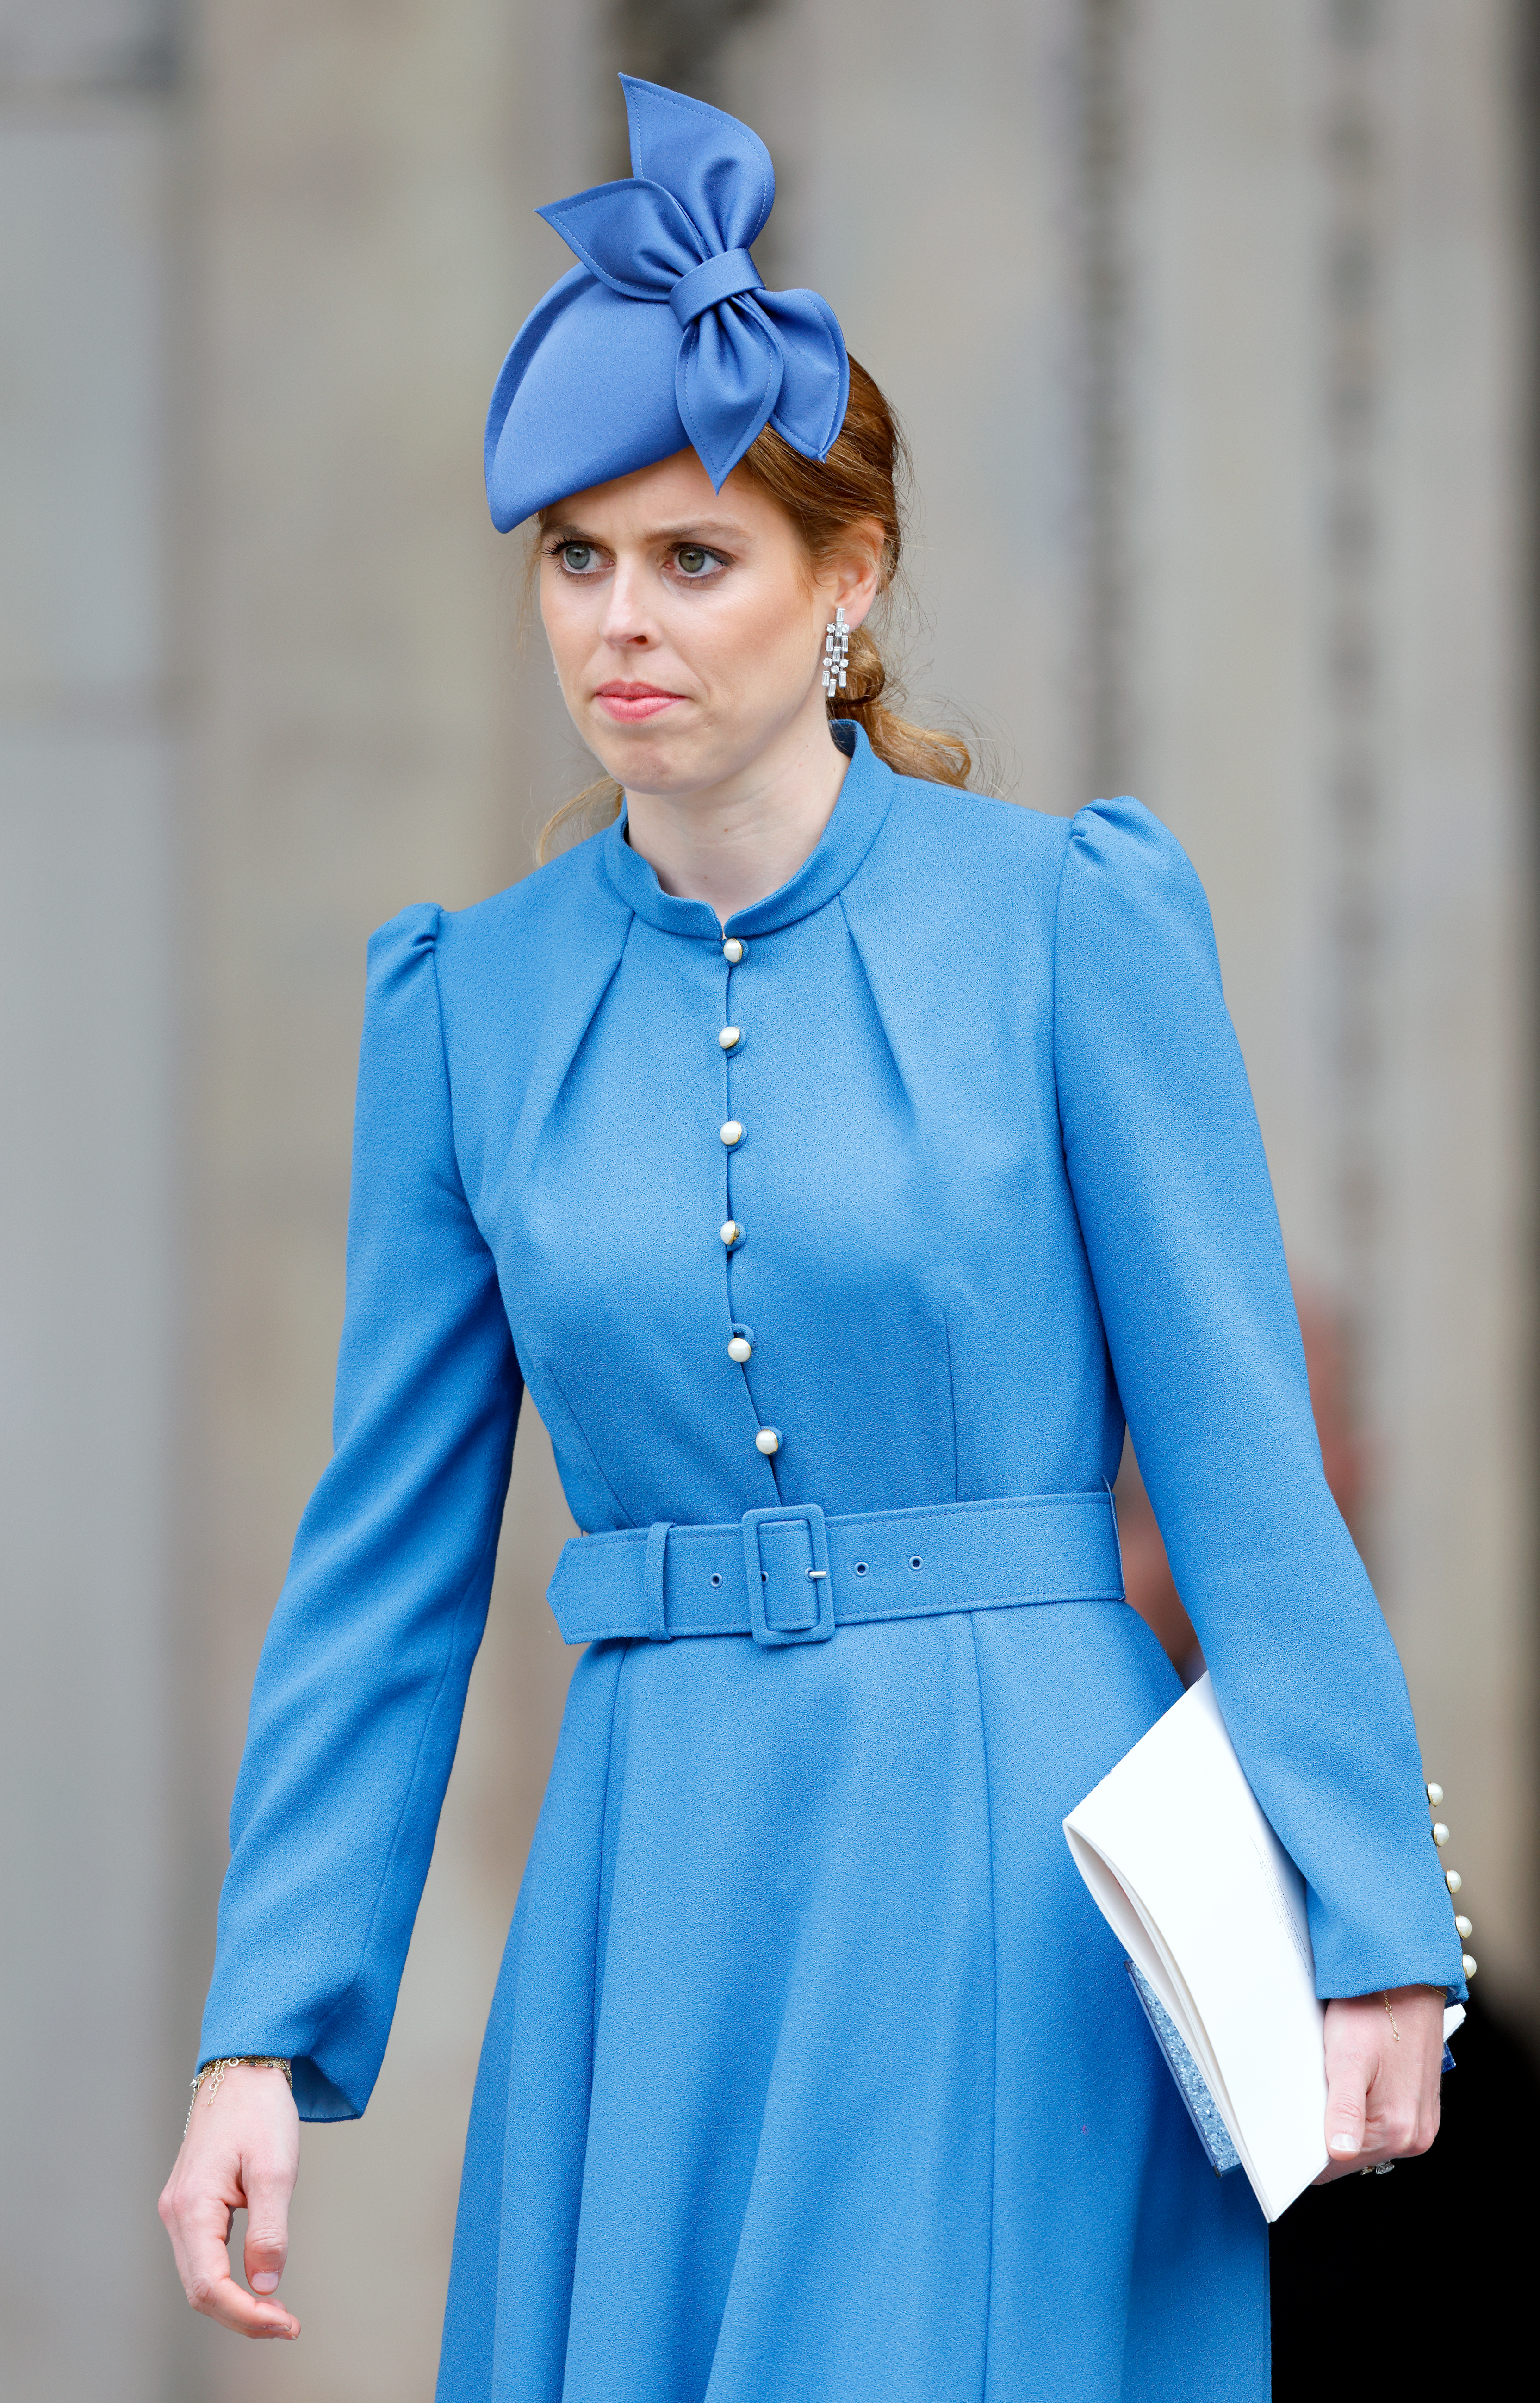 Princess Beatrice at the National Service of Thanksgiving to celebrate the Platinum Jubilee of Queen Elizabeth II in London, England on June 3, 2022 | Source: Getty Images